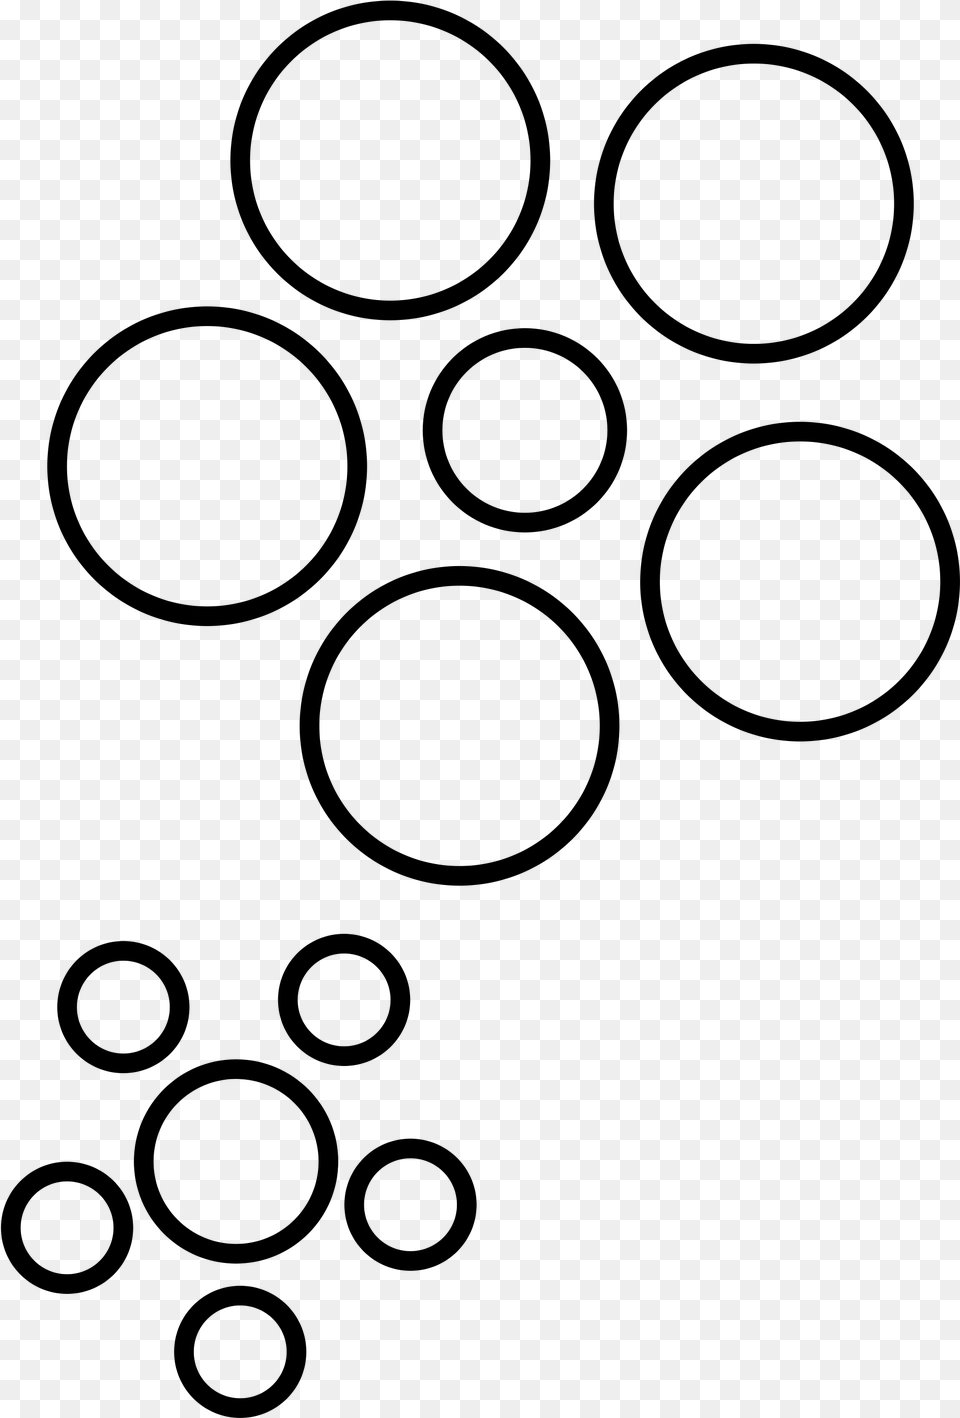 Relative Size Of Objects Ebbinghaus Illusion, Gray Free Png